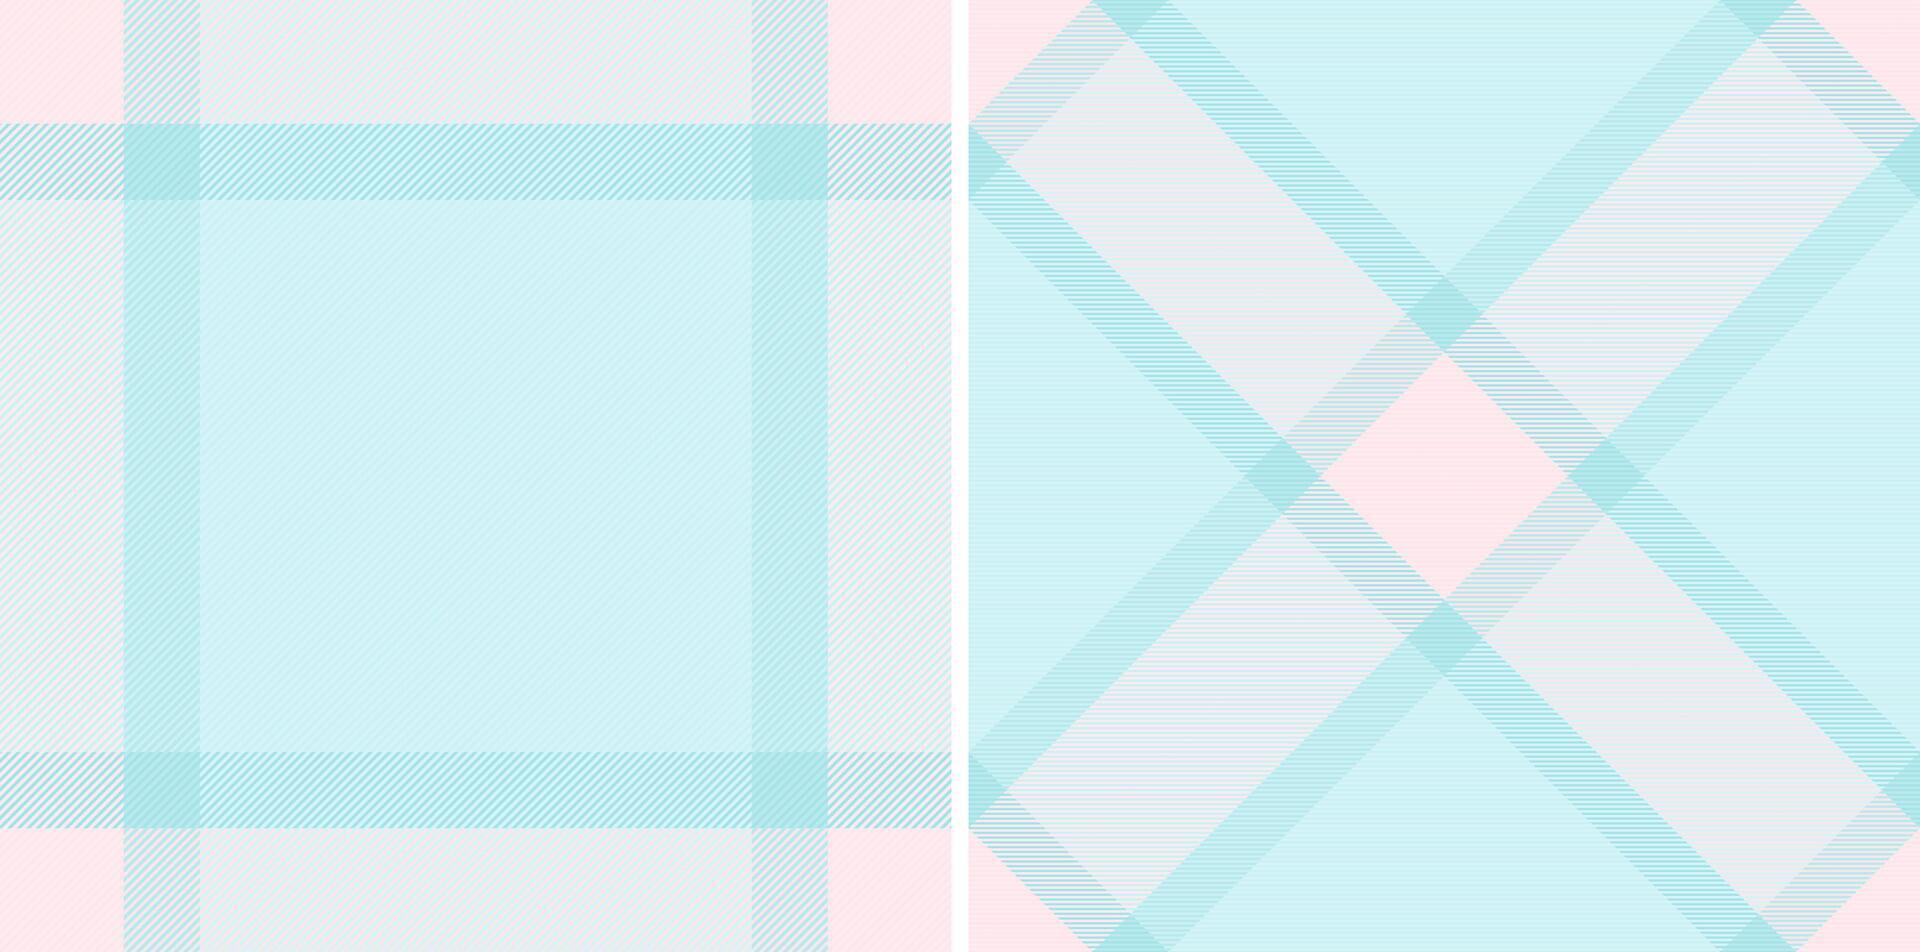 Pattern check fabric of background textile vector with a seamless texture plaid tartan.